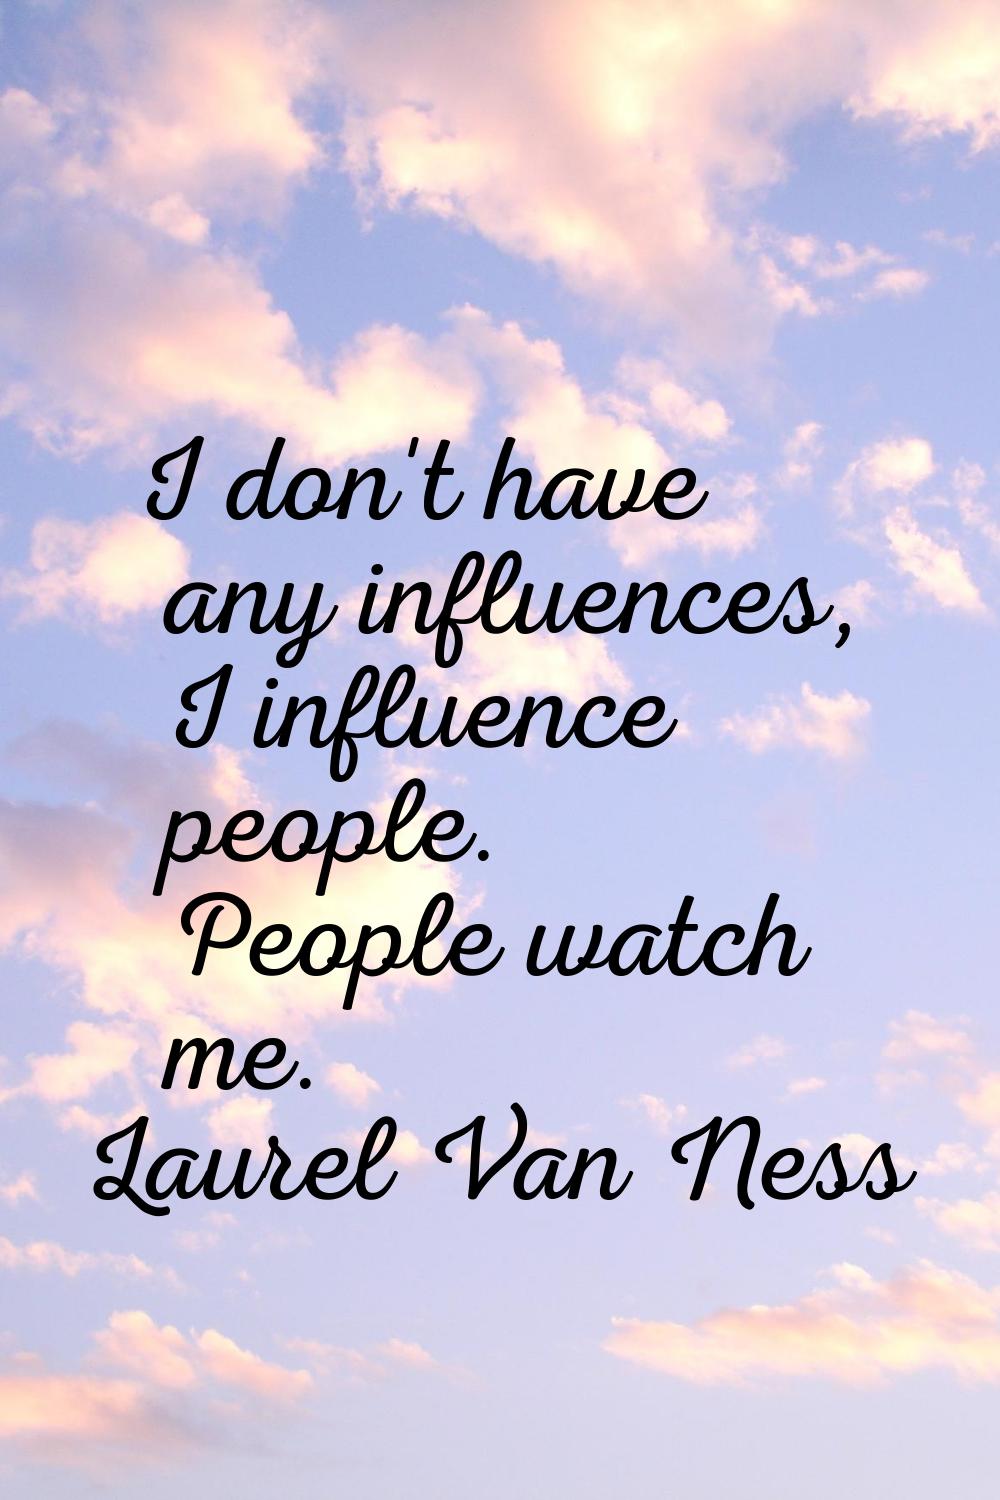 I don't have any influences, I influence people. People watch me.